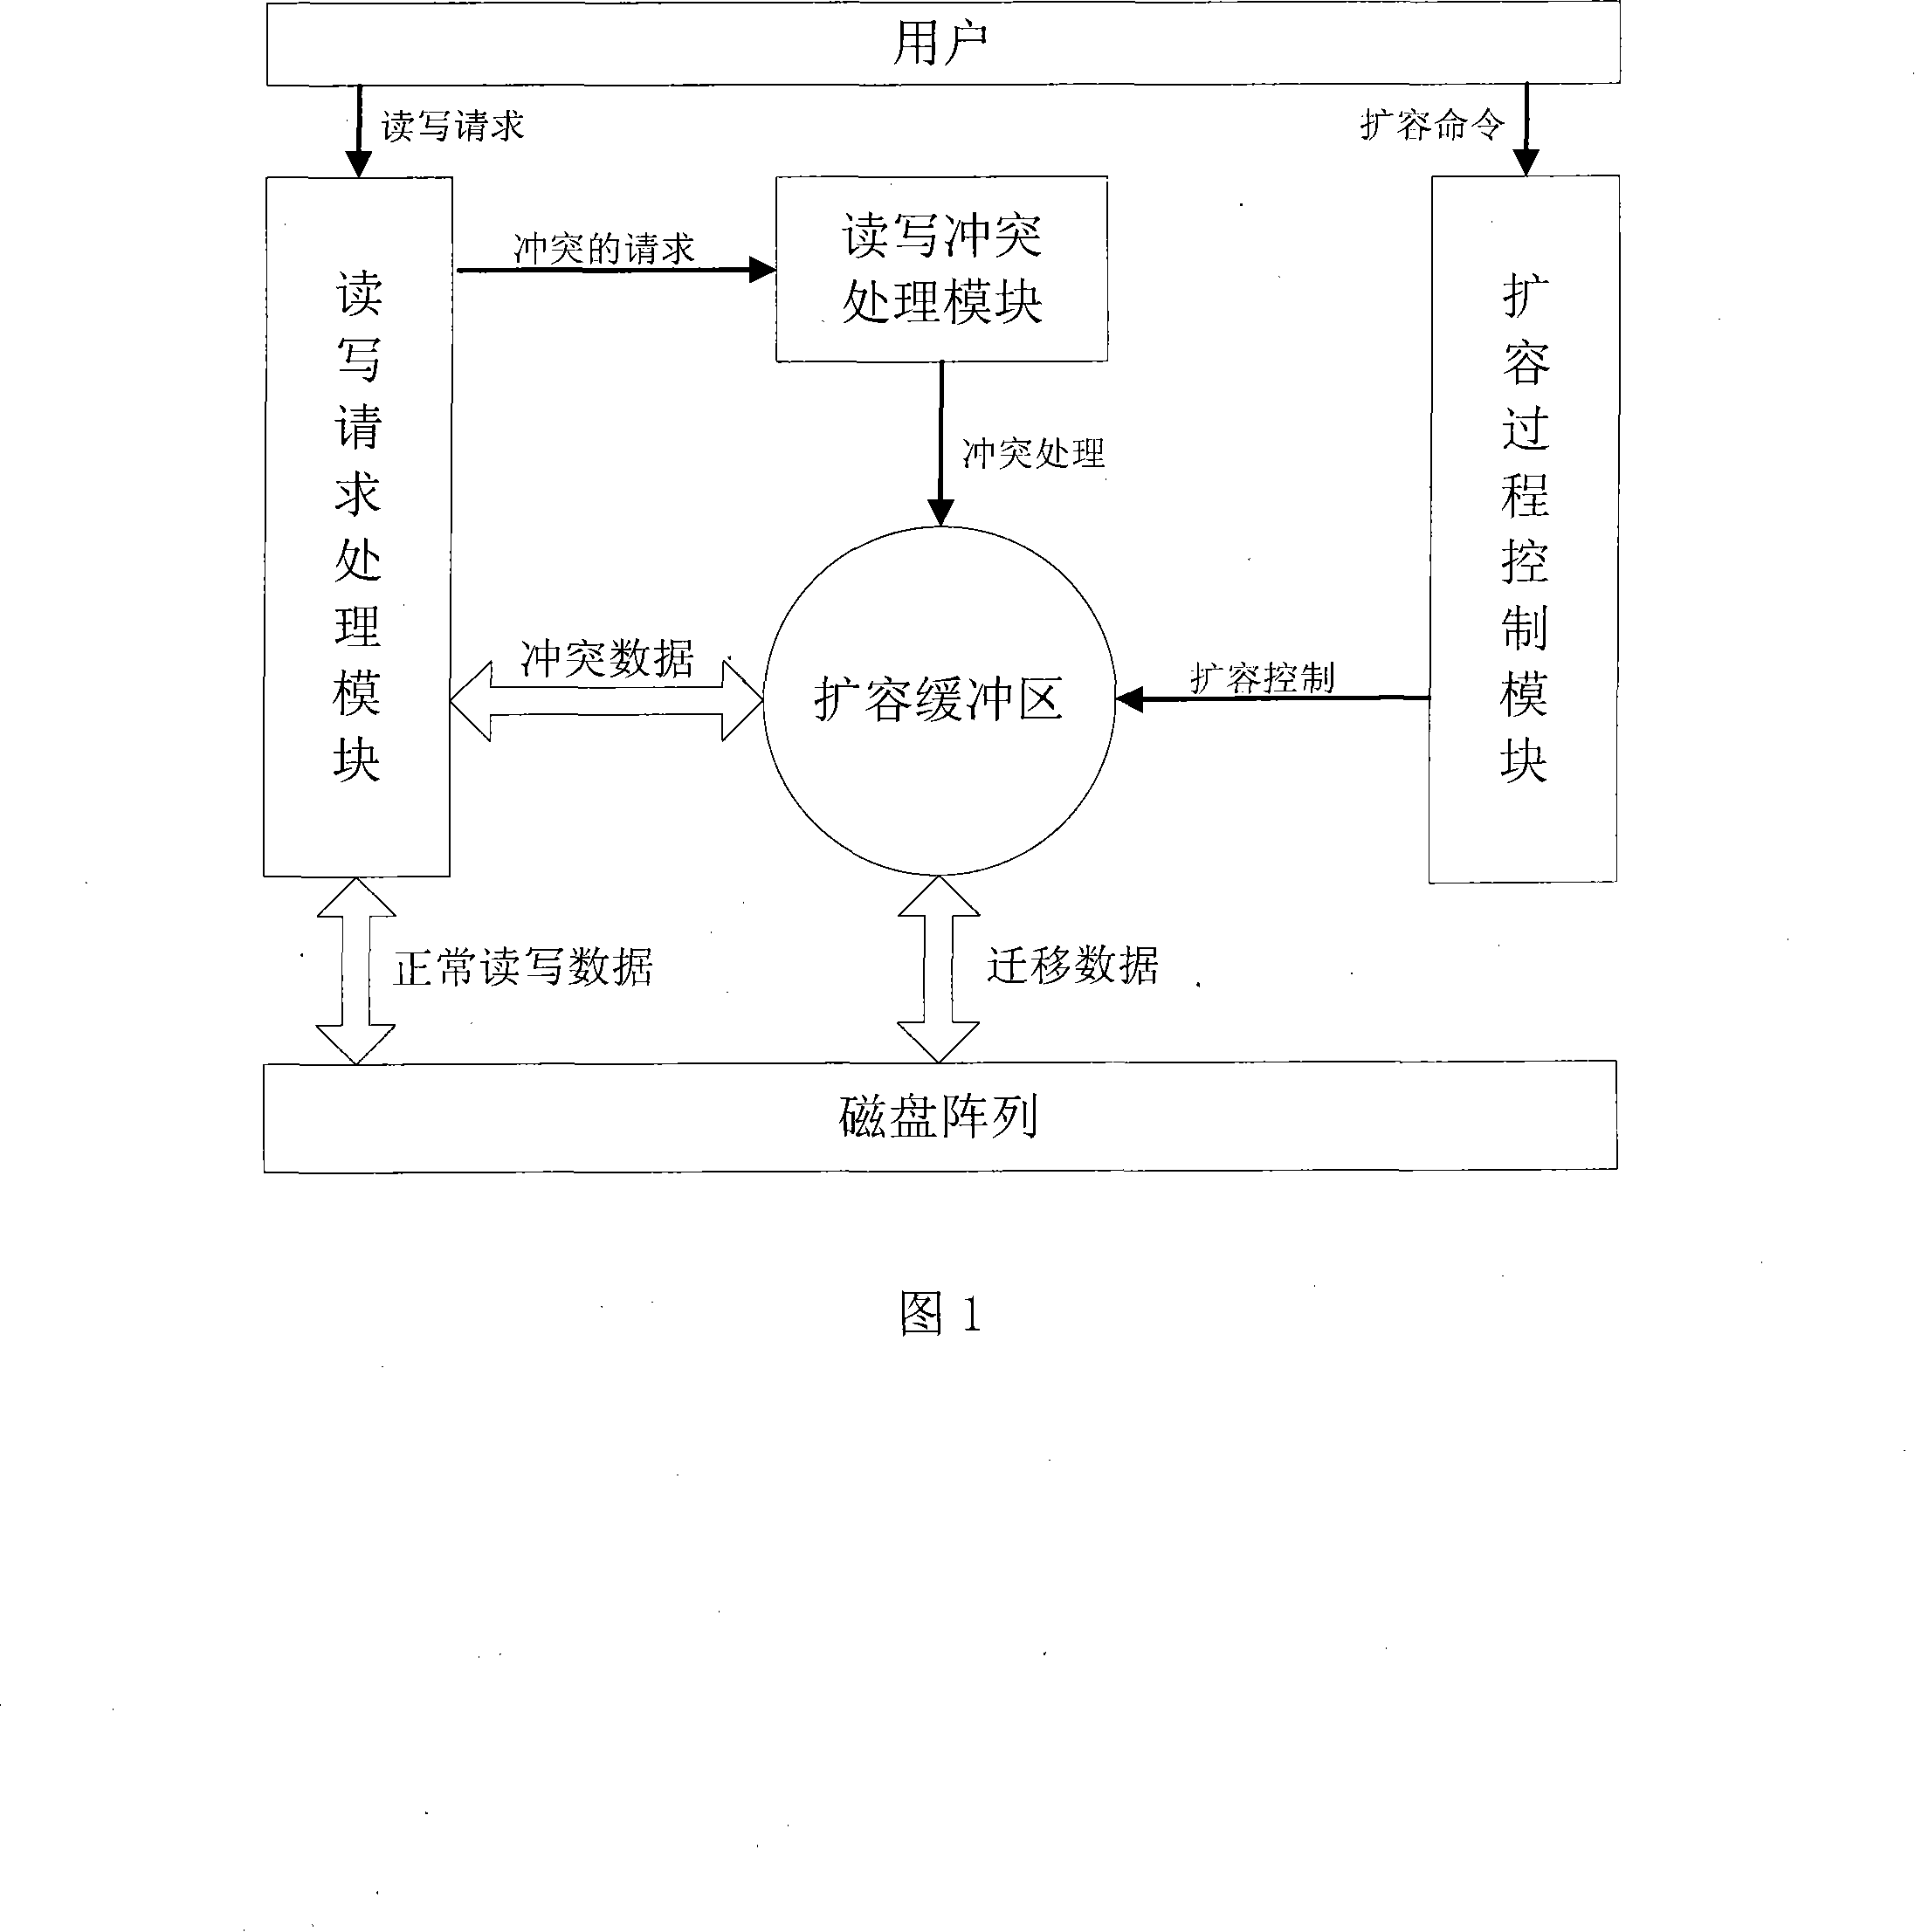 On-line capacity-enlarging system and method for magnetic disc array